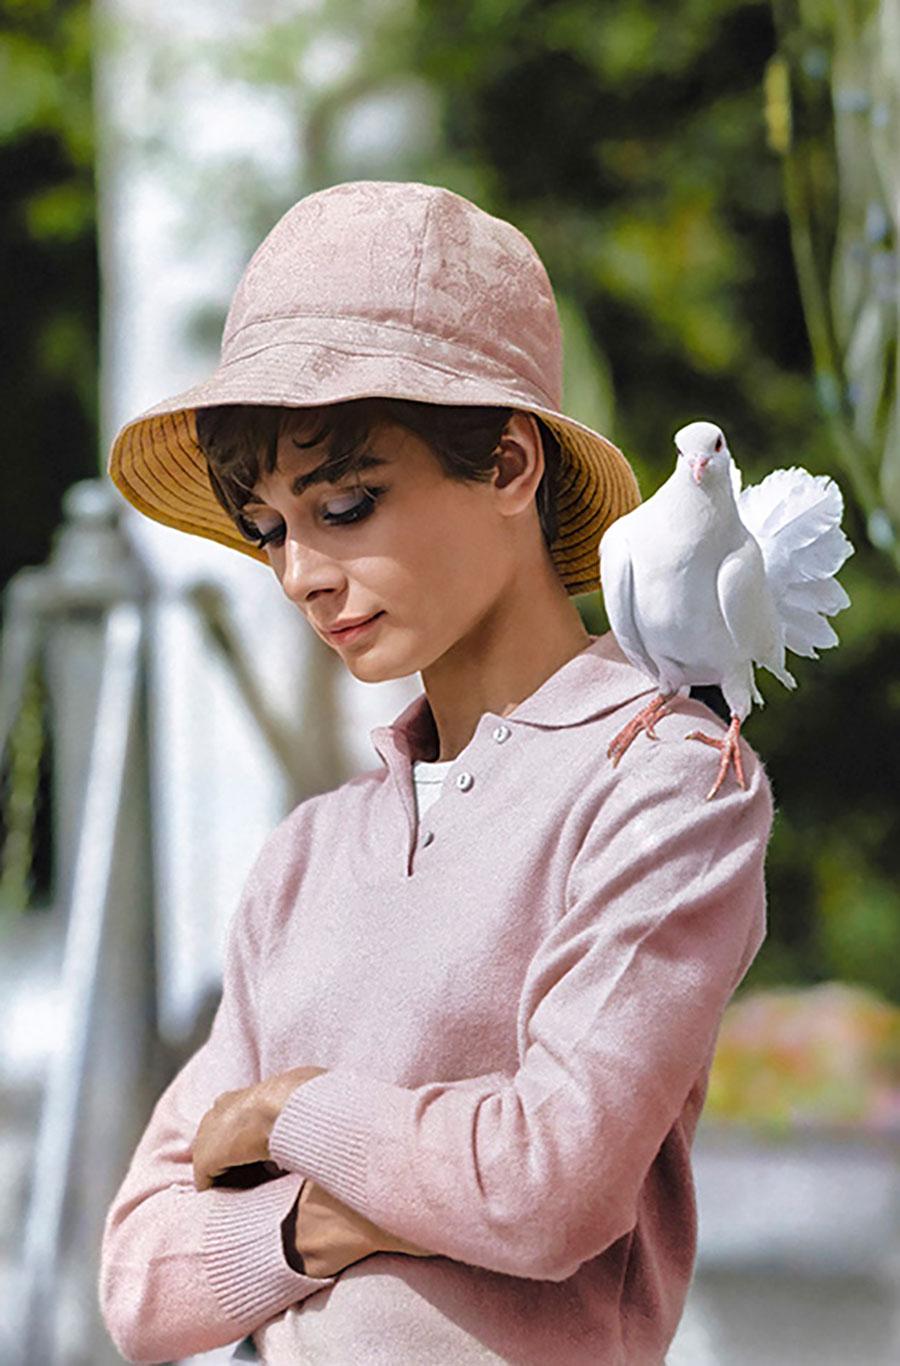 Audrey Hepburn Dove (colorized)
1967 (printed later)
C-Type Print
40 x30 inches 
Posthumous Edition of 50: digitally signed and numbered on the front, estate-stamped on reverse.

The print is accompanied by a certificate of authenticity signed by